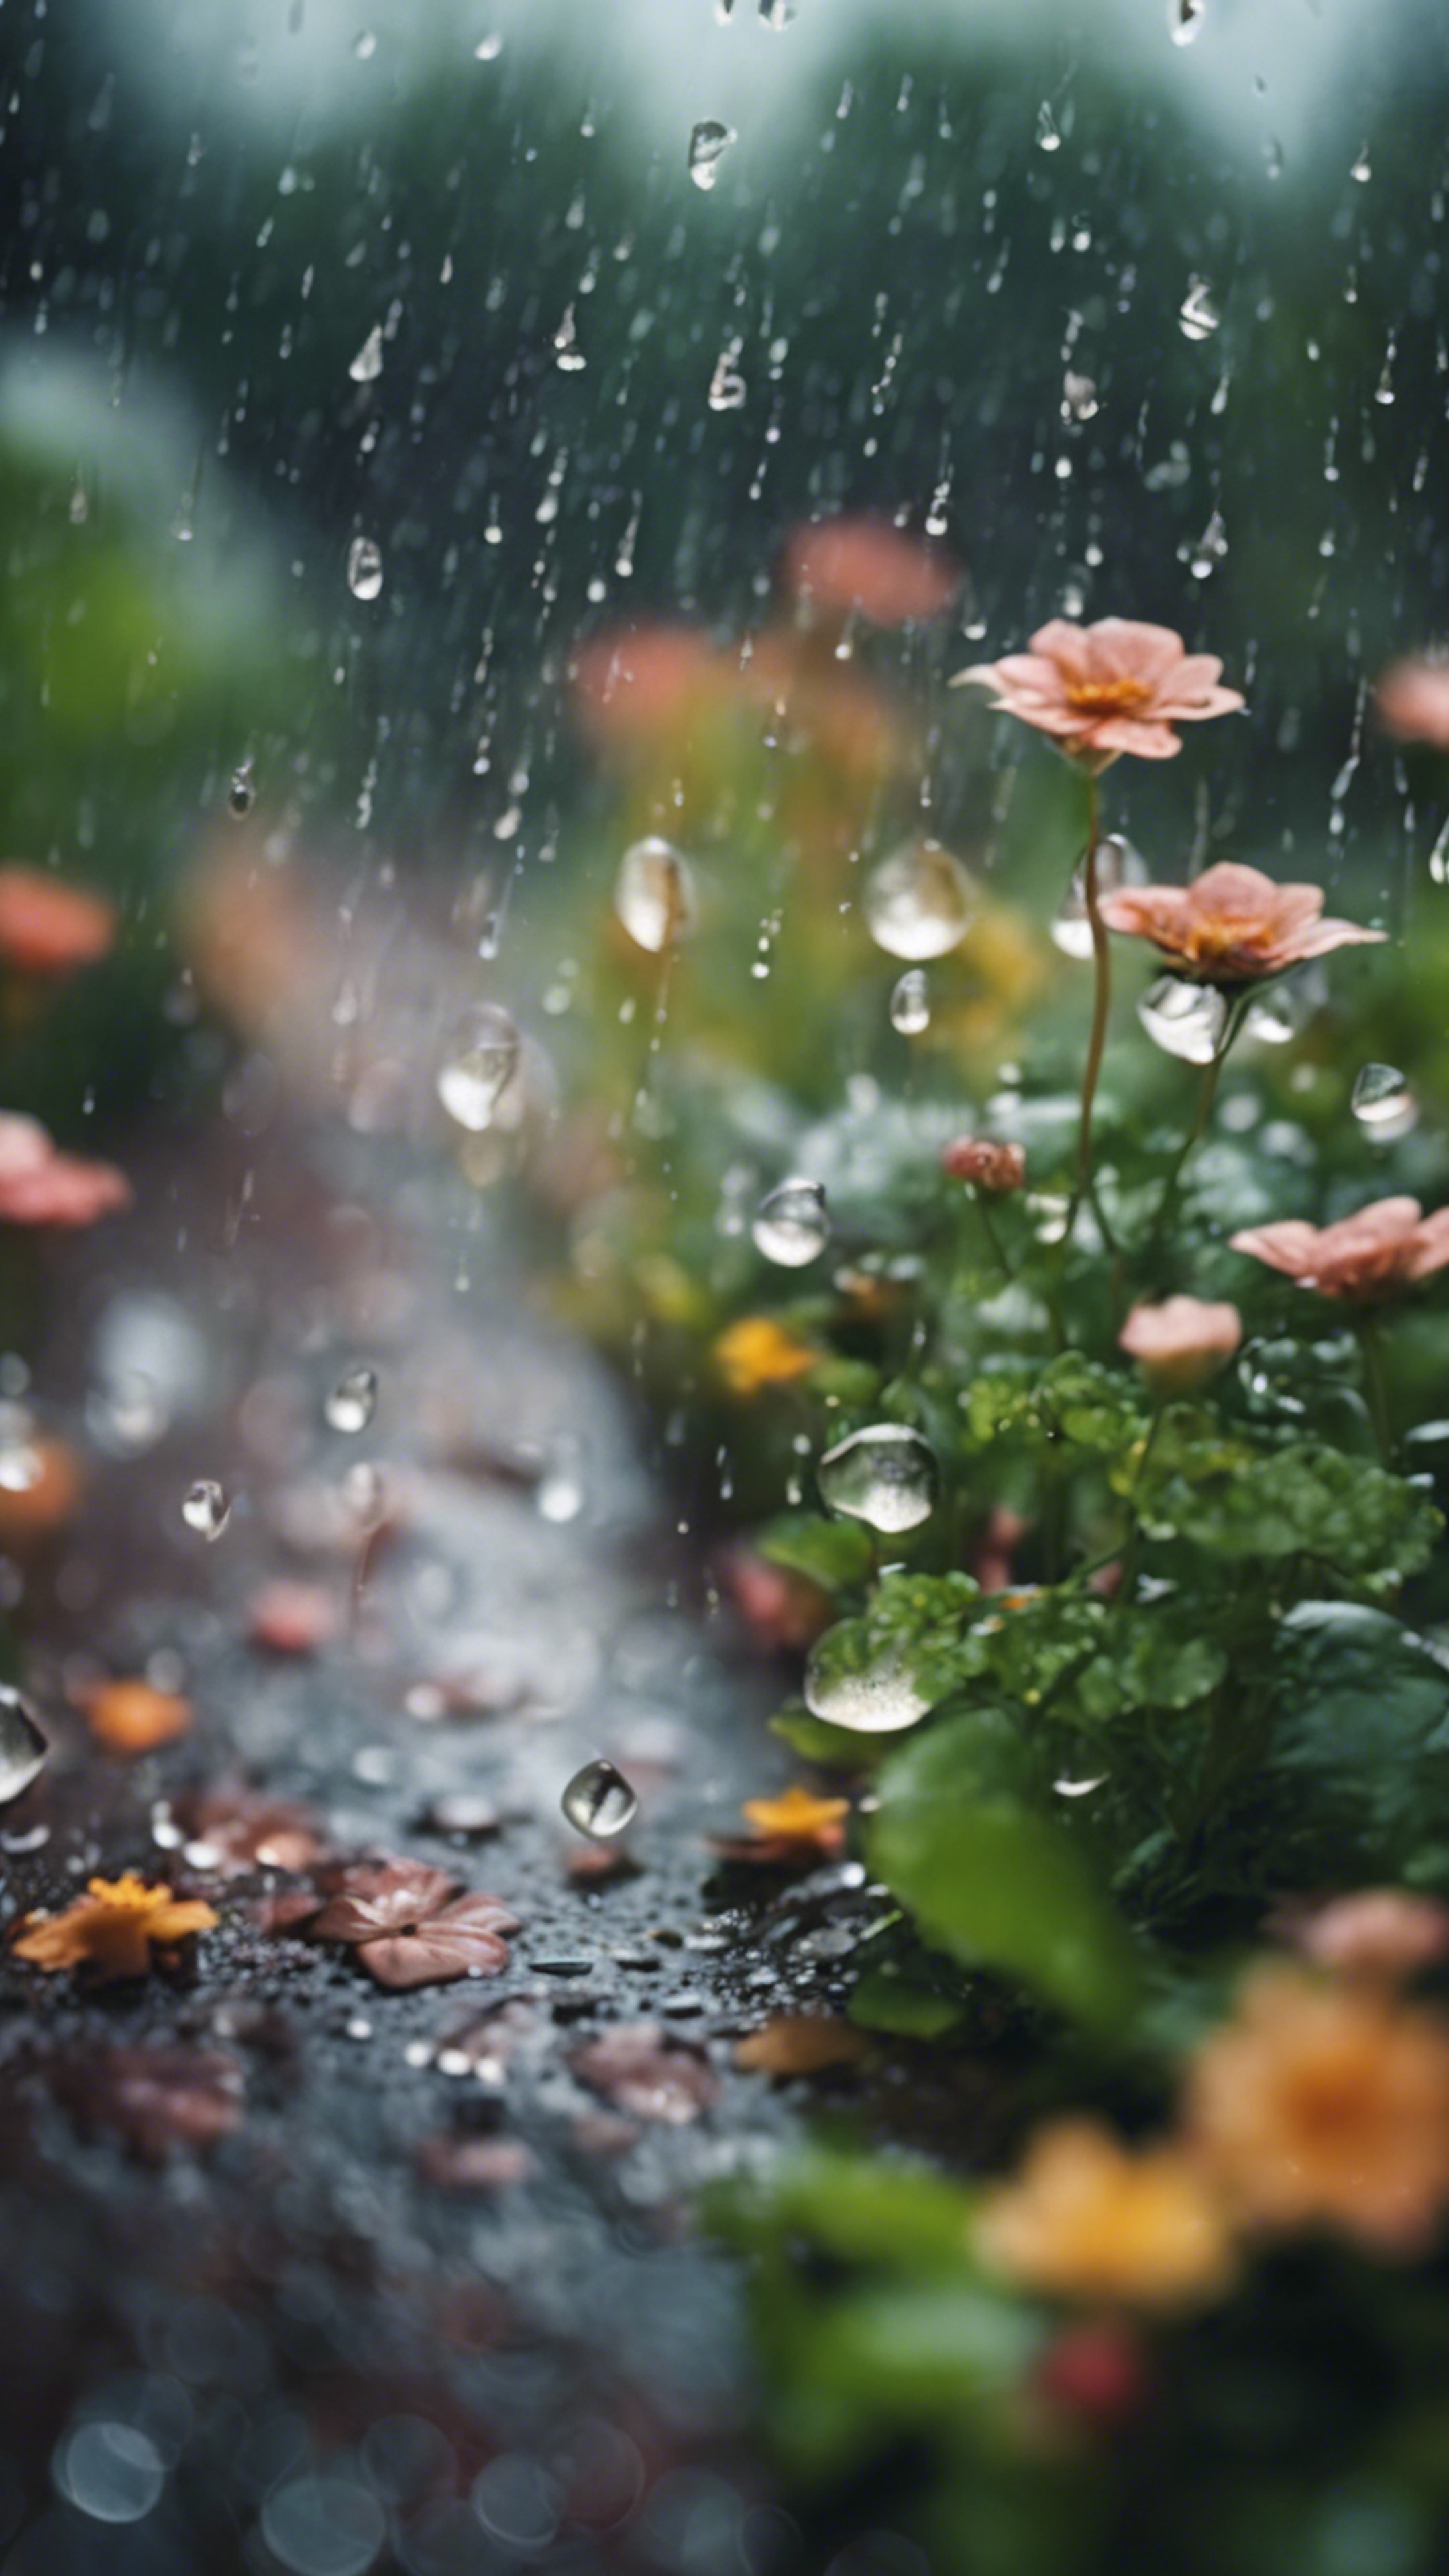 A tinkling rain garden during a soft rain shower, with raindrops dancing on the leaves and petals. Шпалери[725596f4b8c5433598b7]